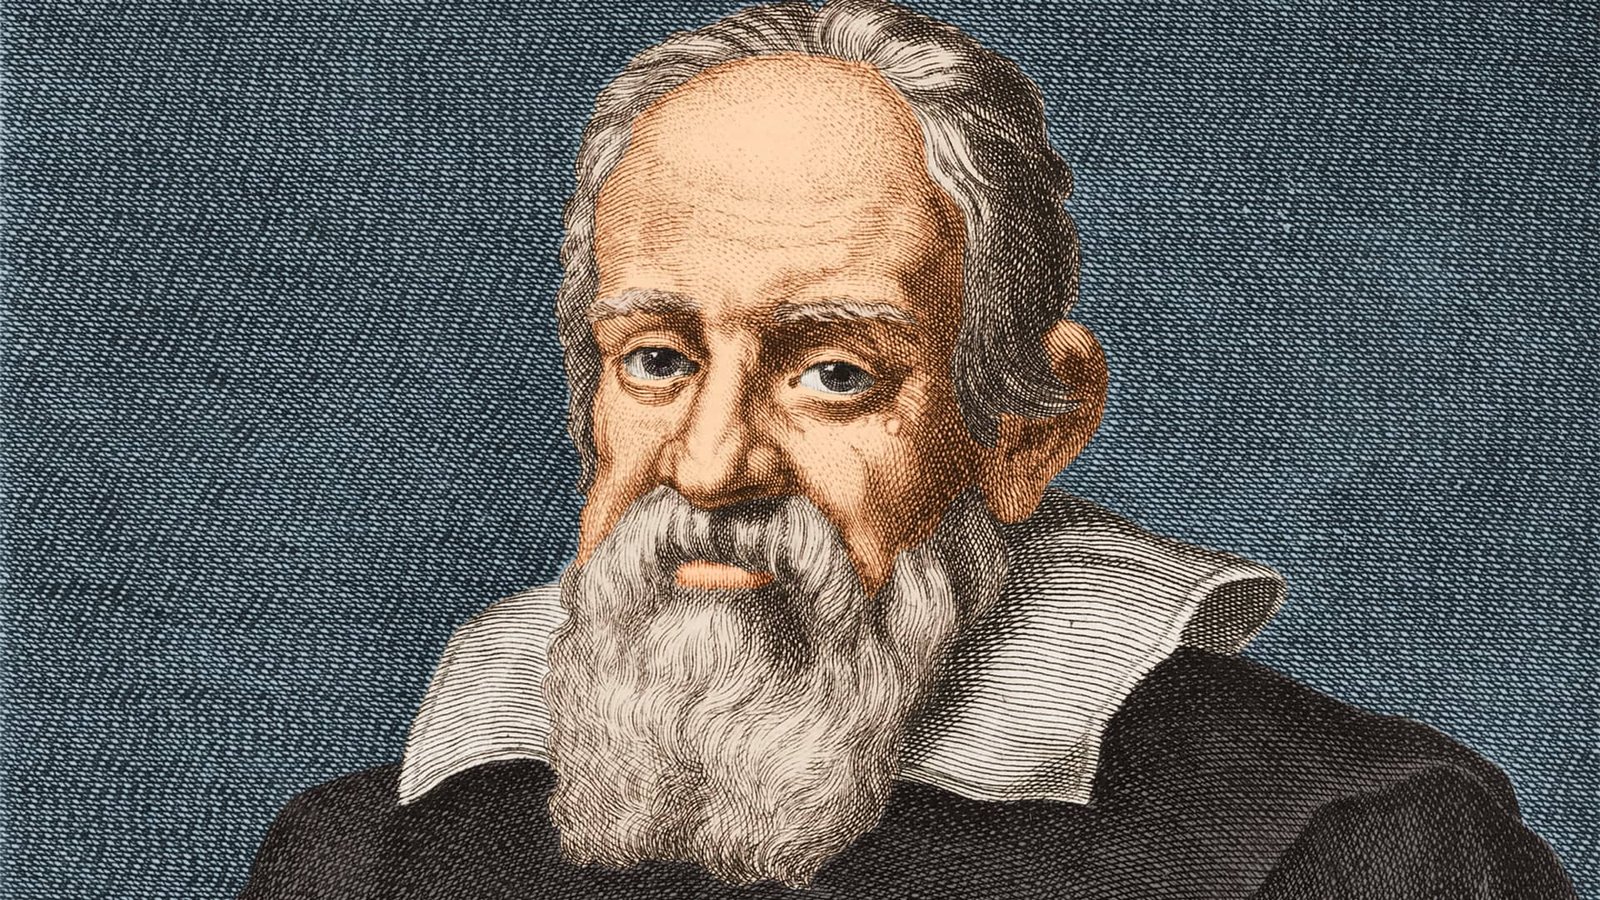 Important Events in the Life of Galileo Galilei